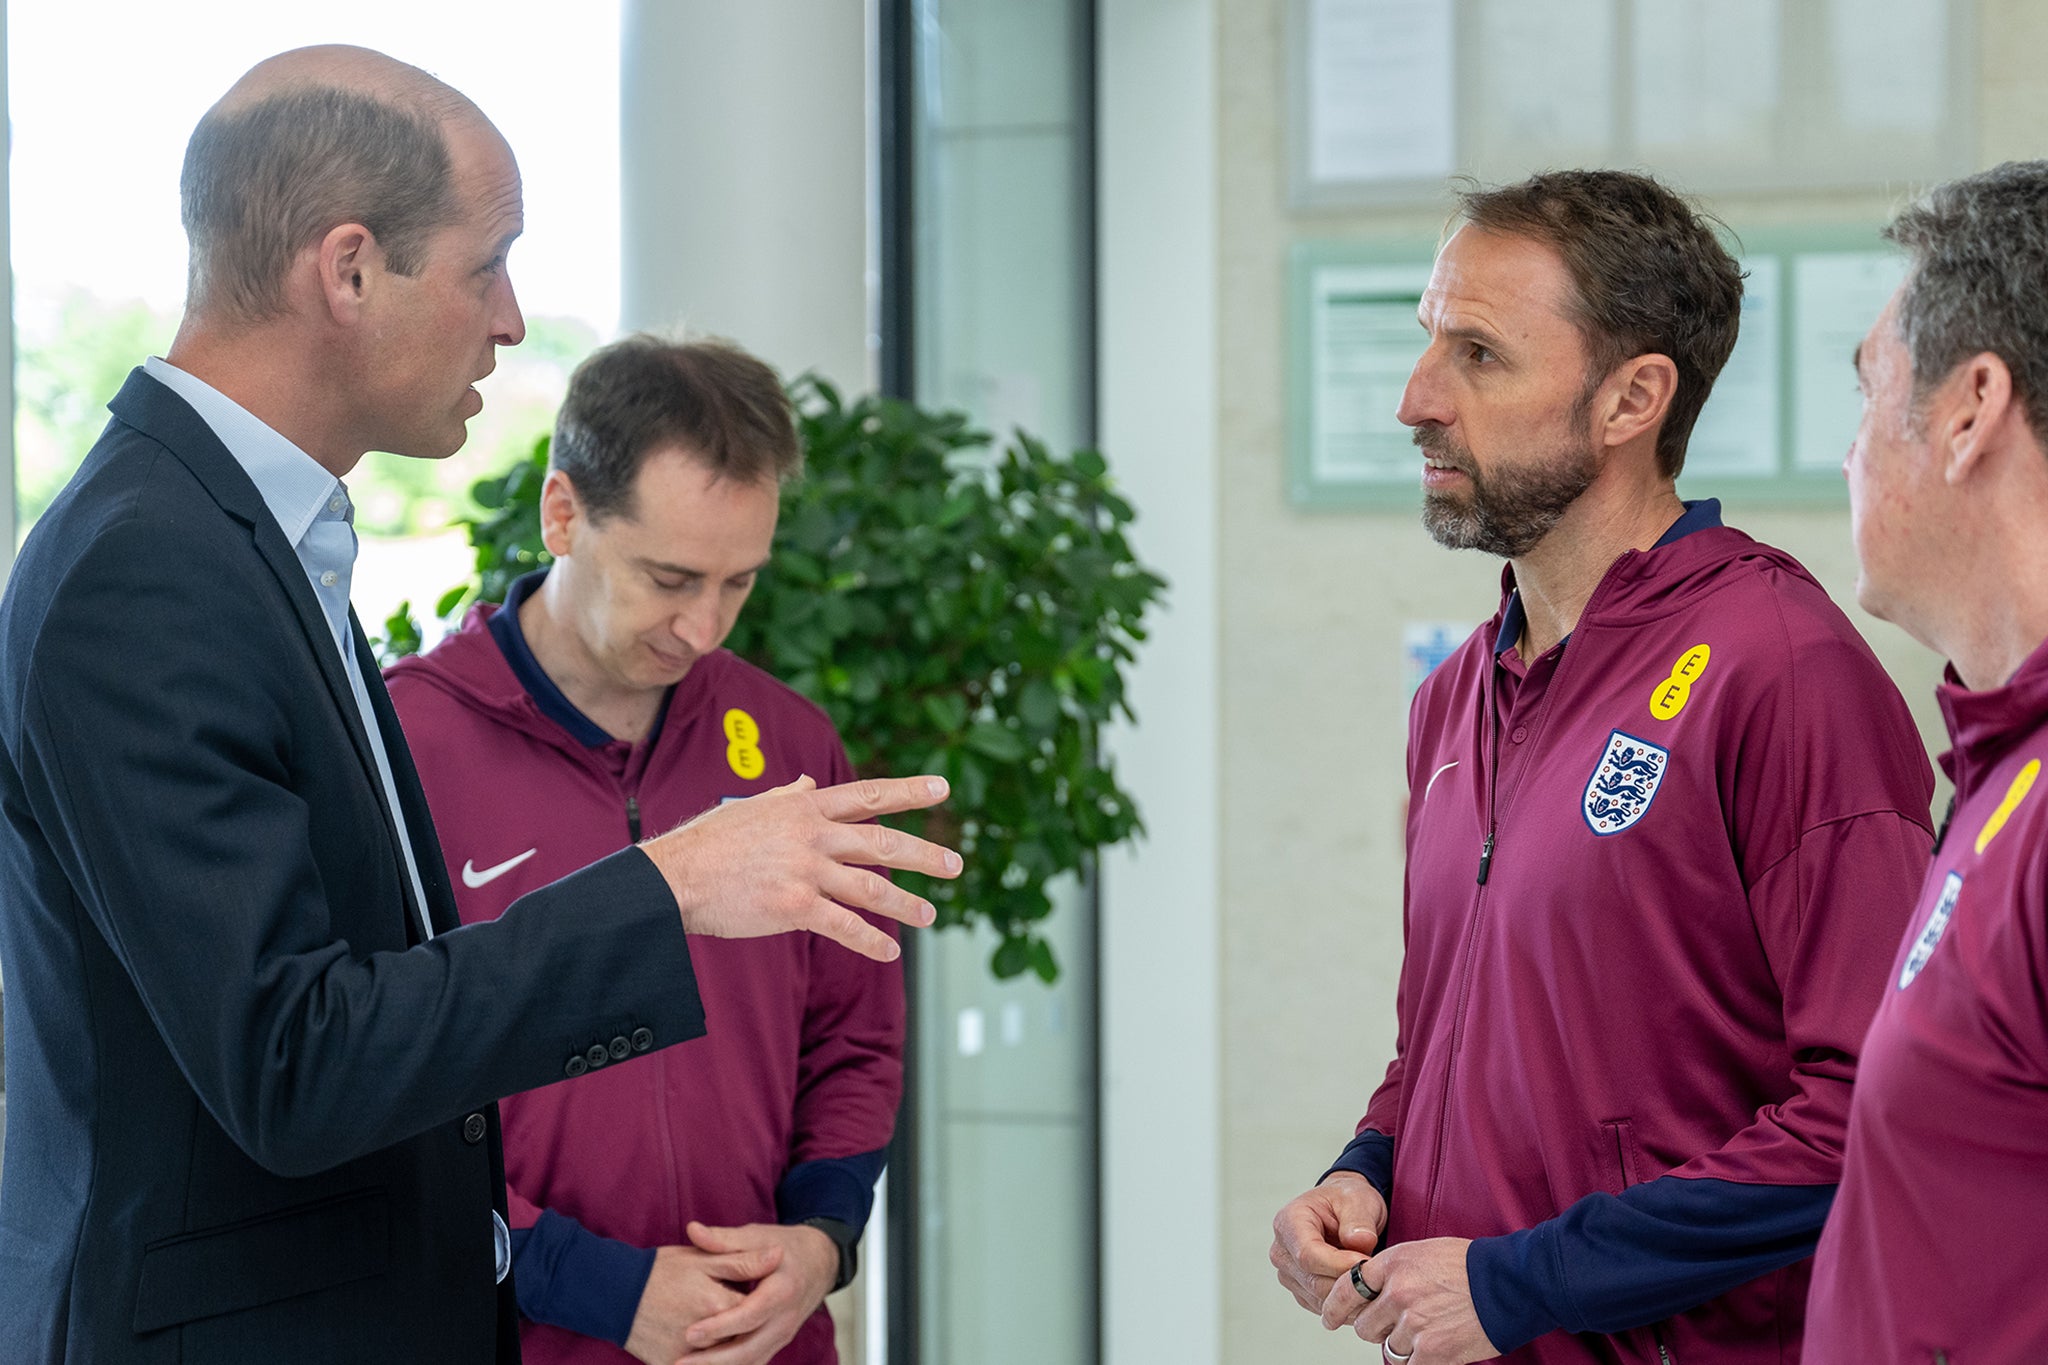 Prince William met with the England squad ahead of this year’s Euros